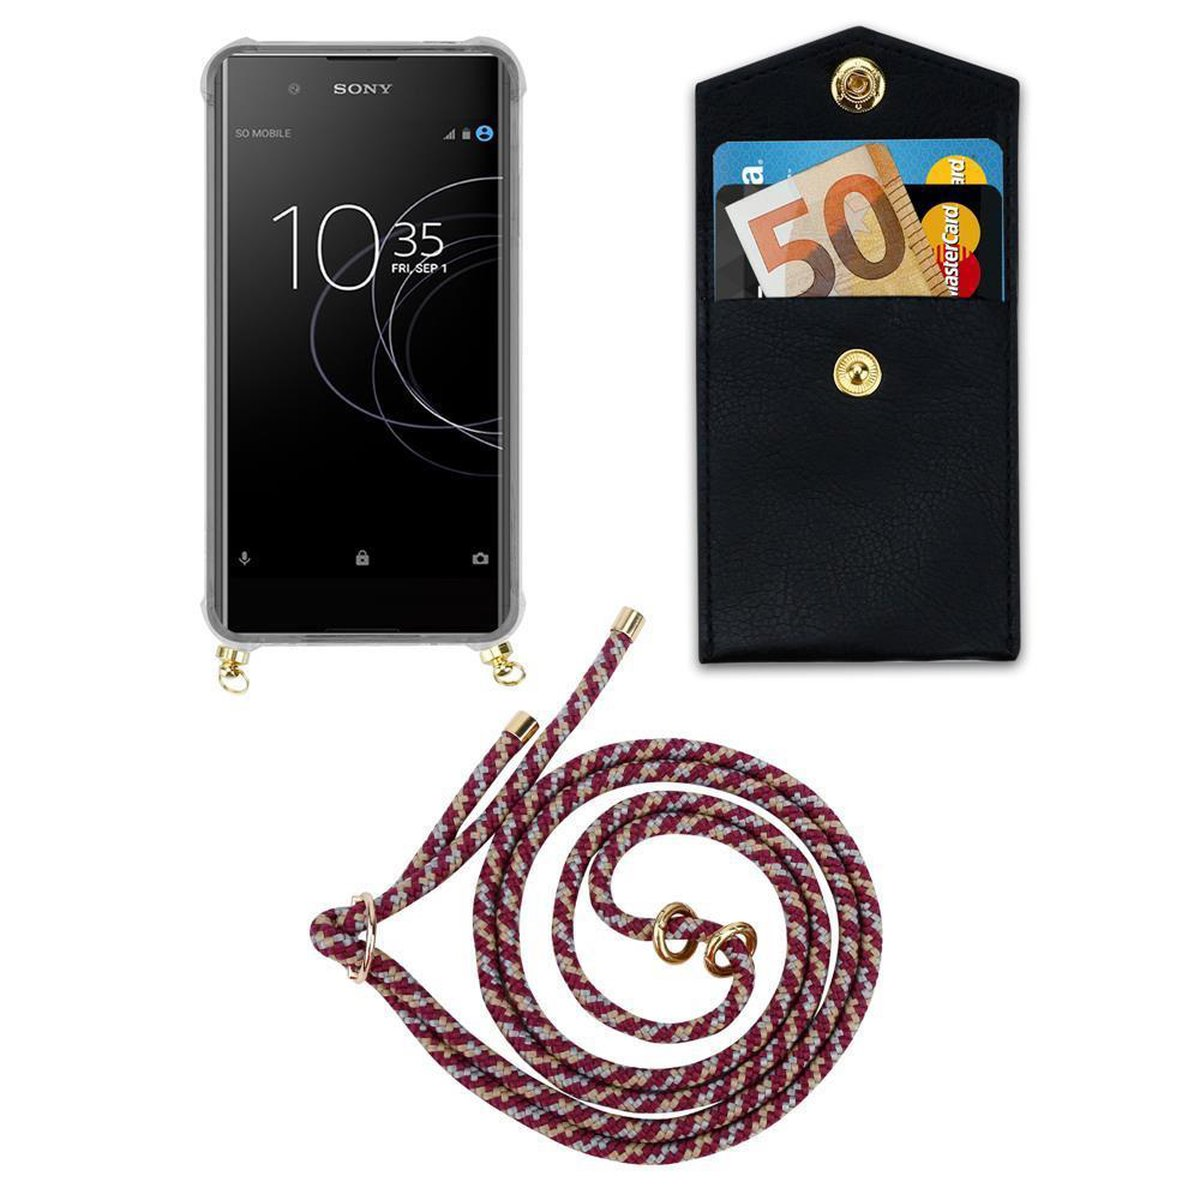 CADORABO Handy Kette mit Gold Hülle, abnehmbarer XA1 und Kordel Sony, Band Xperia WEIß ULTRA, Ringen, GELB Backcover, ROT